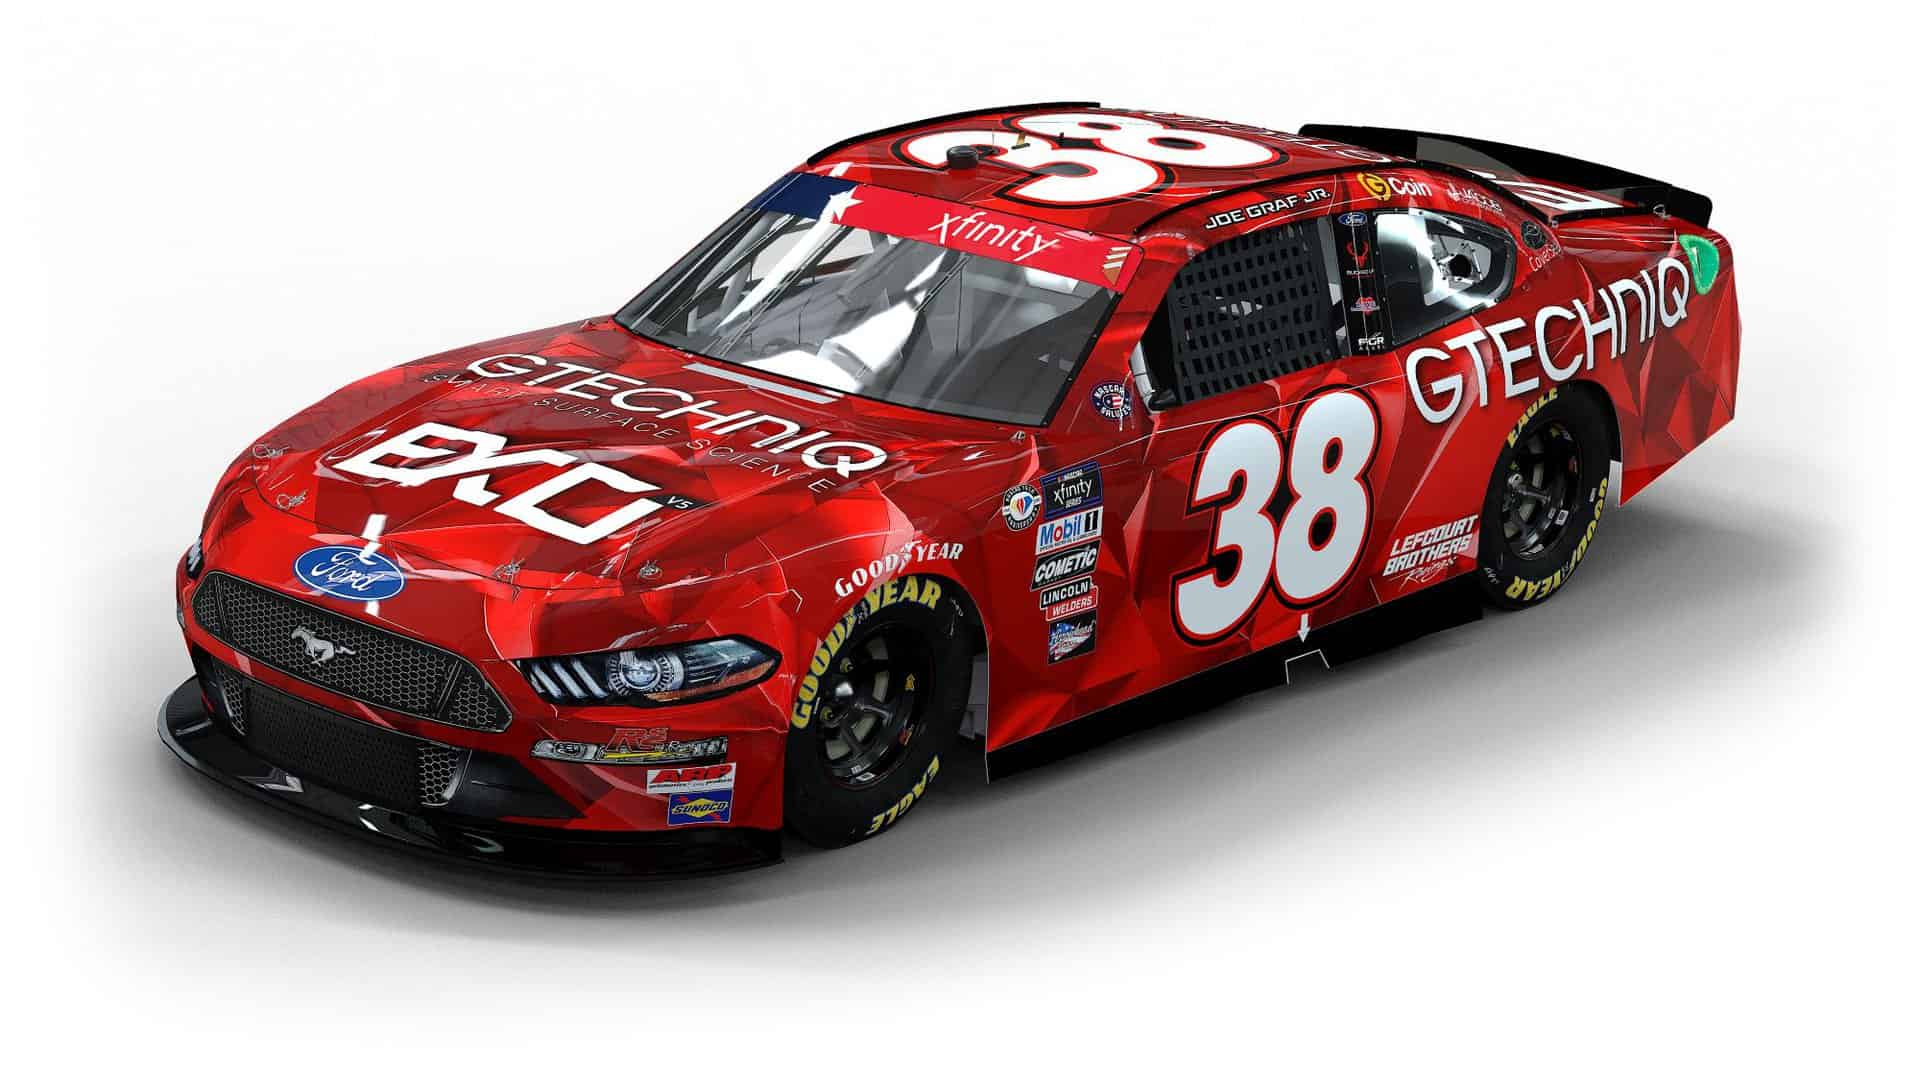 Read more about the article Joe Graf Jr. Charlotte (N.C.) Motor Speedway Alsco Uniforms 300 NASCAR Xfinity Series Race Preview